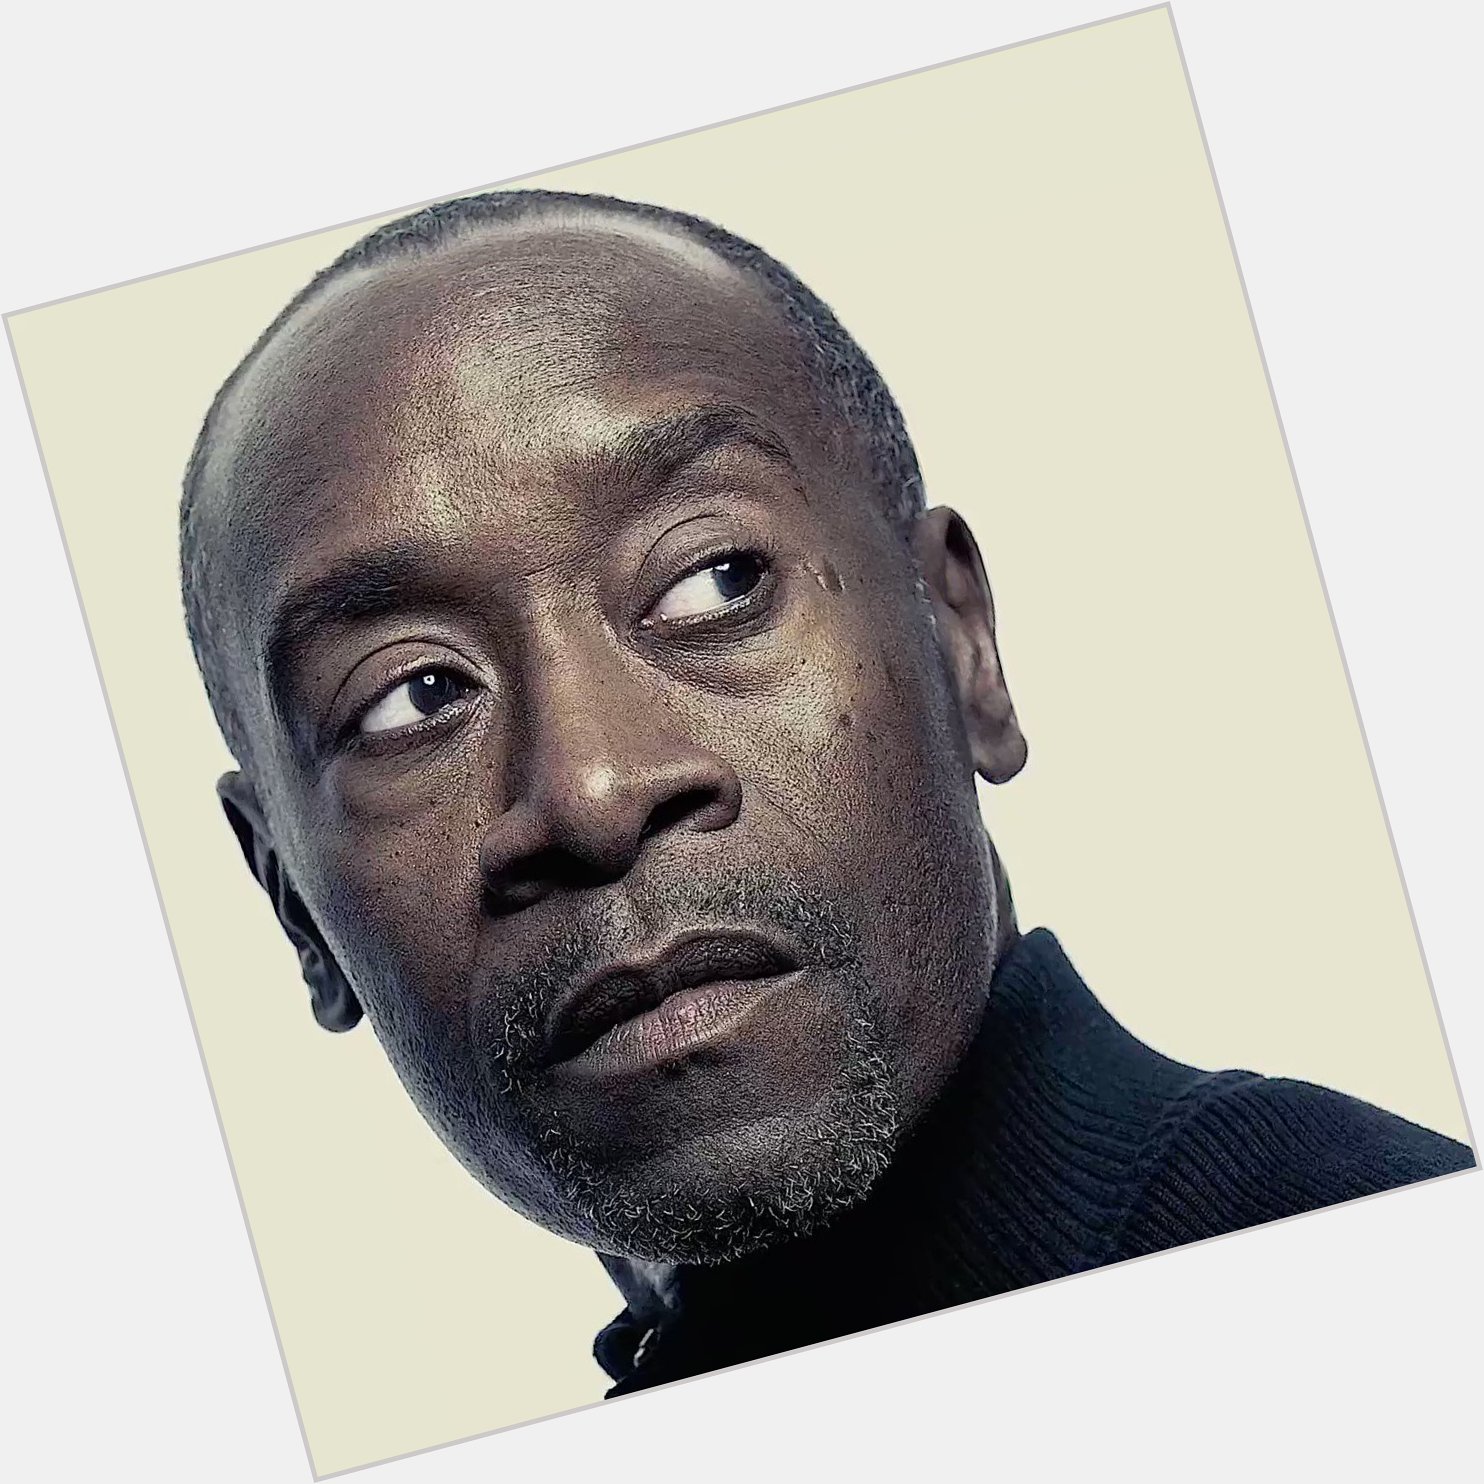 WISHING A VERY HAPPY BIRTHDAY TO THE ICONIC DON CHEADLE! 